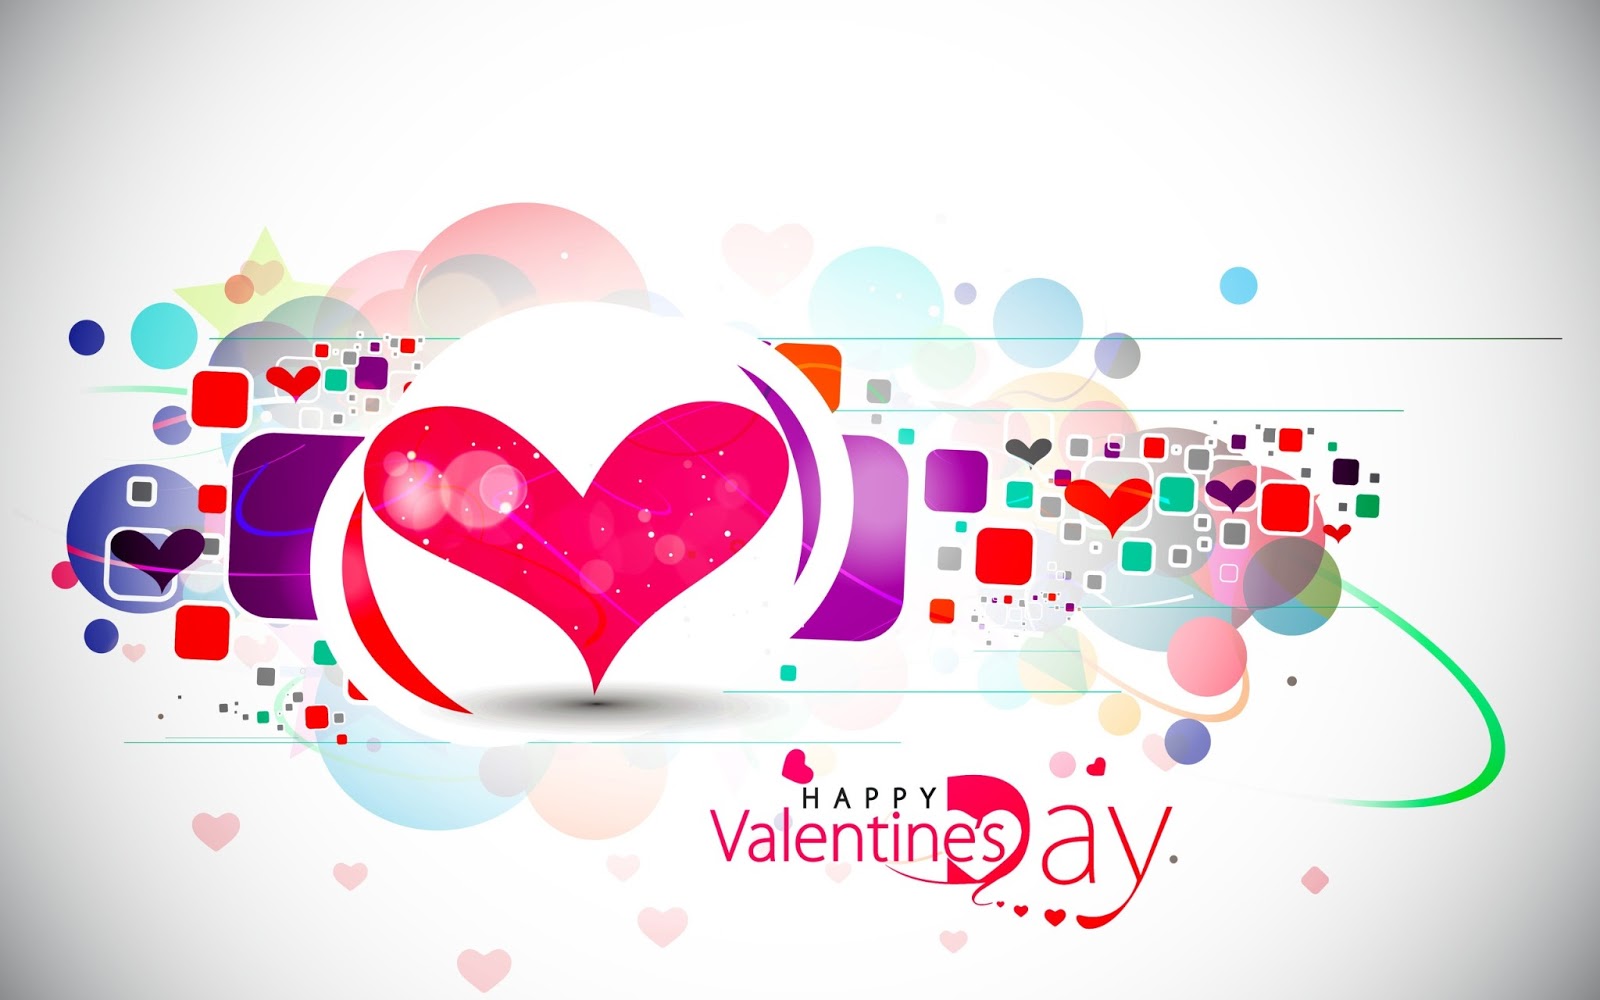 Velentines day wallpaper for the month of love (8)